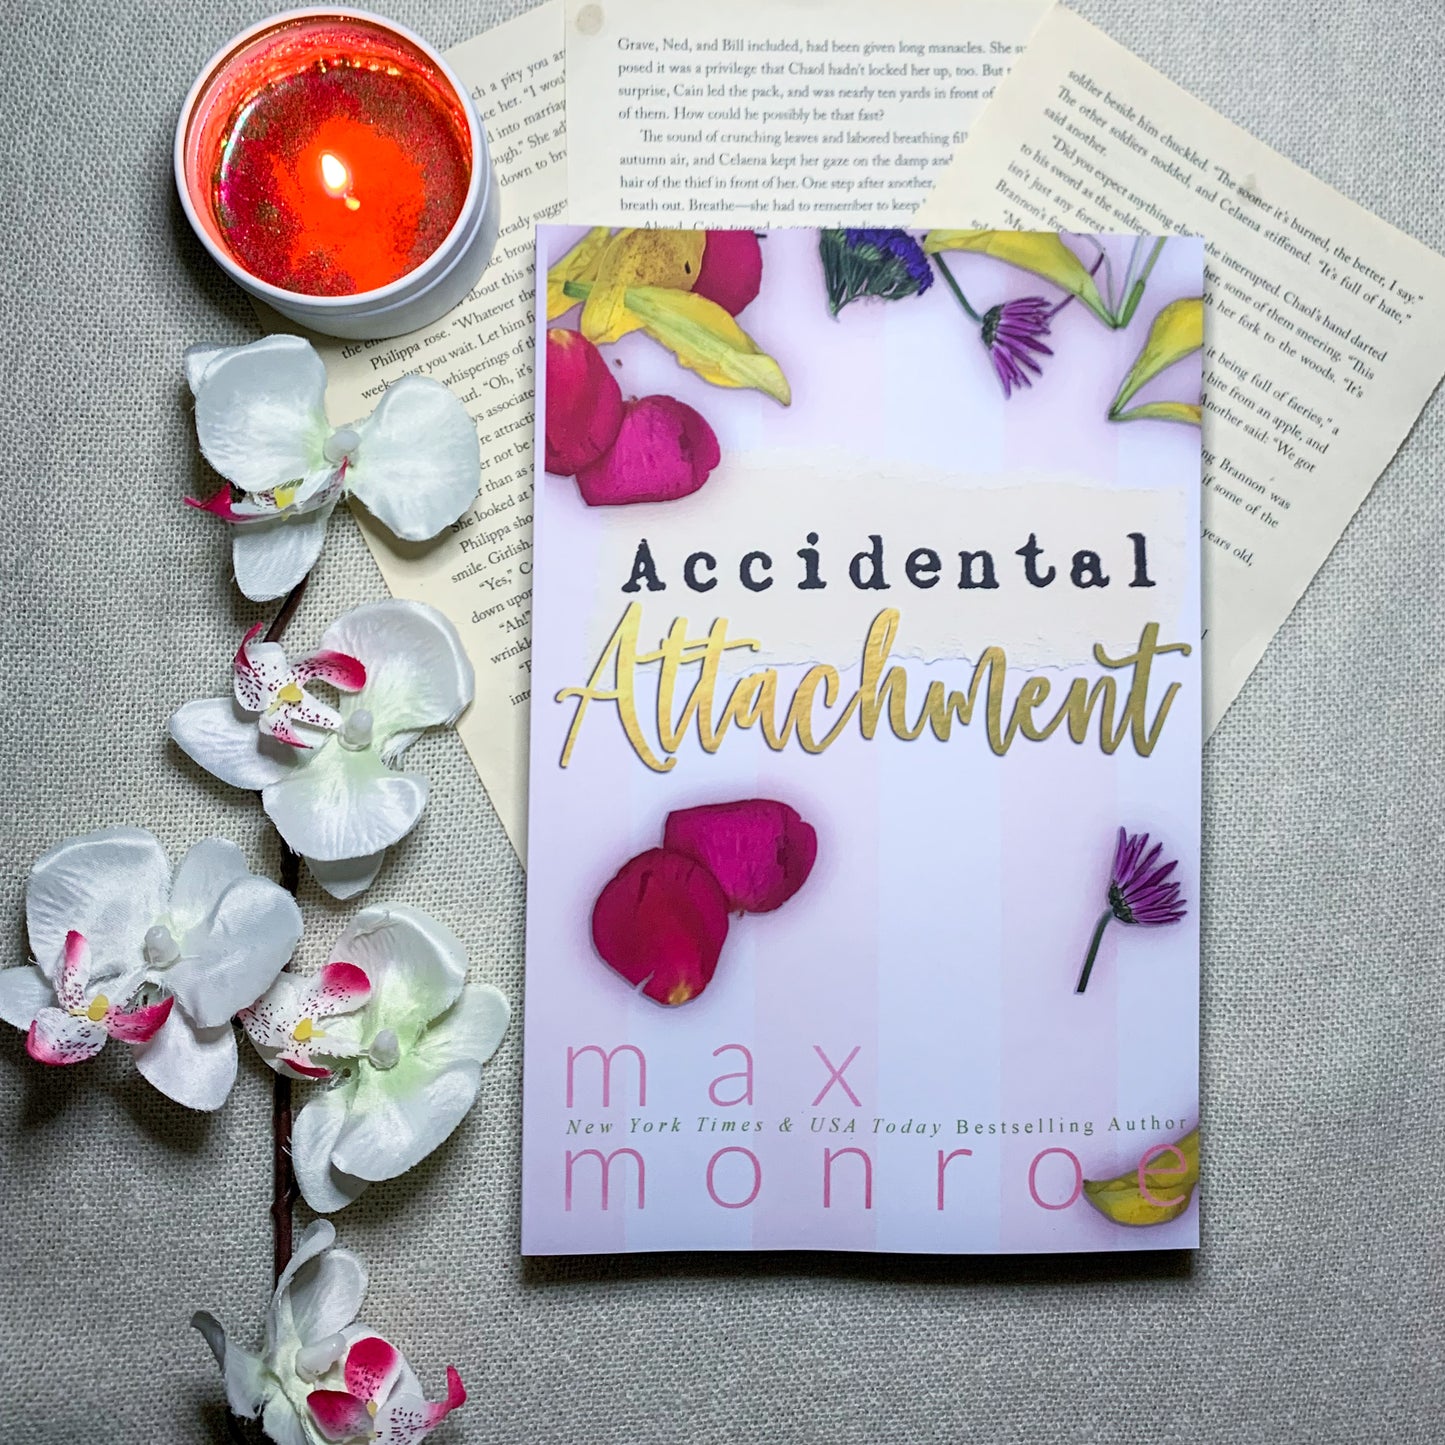 Accidental Attachment by Max Monroe